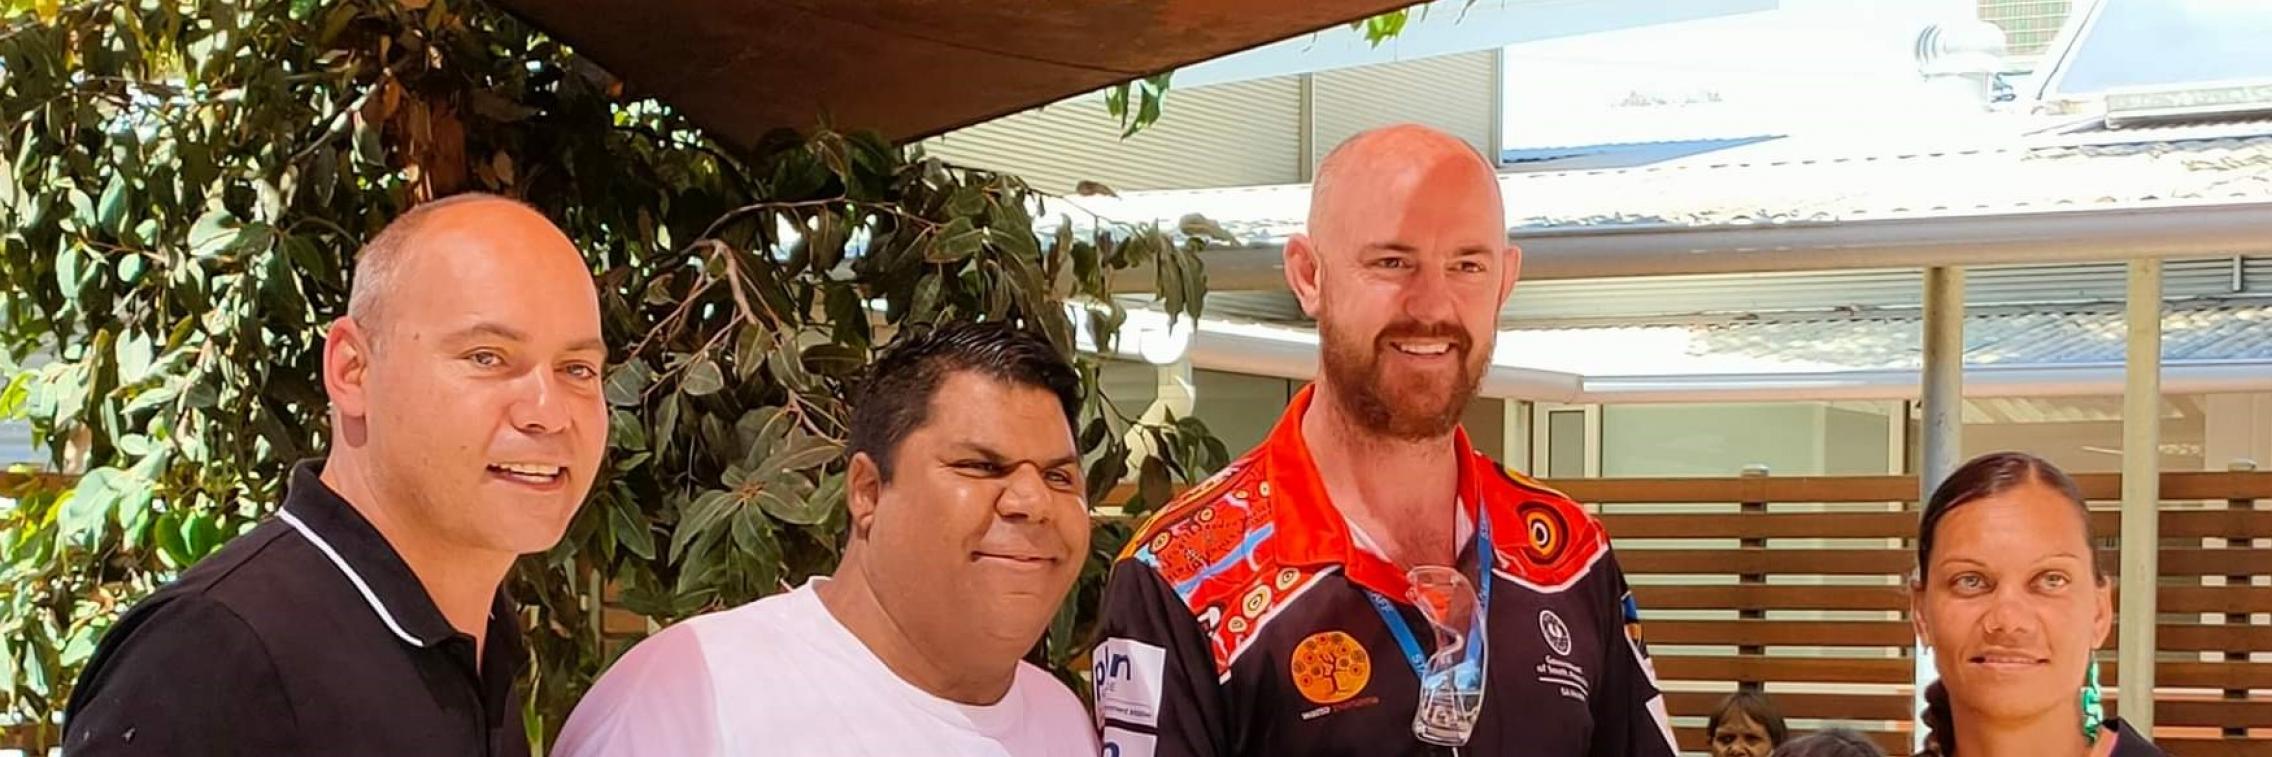 AKction Reference Group members Jared and Rhanee presenting a memorial Kidney art piece to Kanggawodli Aboriginal Hostel and dialysis service at the launch of the Cultural Bias document - L to R Wade Alan, Jared Katinyeri, Kurt Towers and Rhanee Lester.